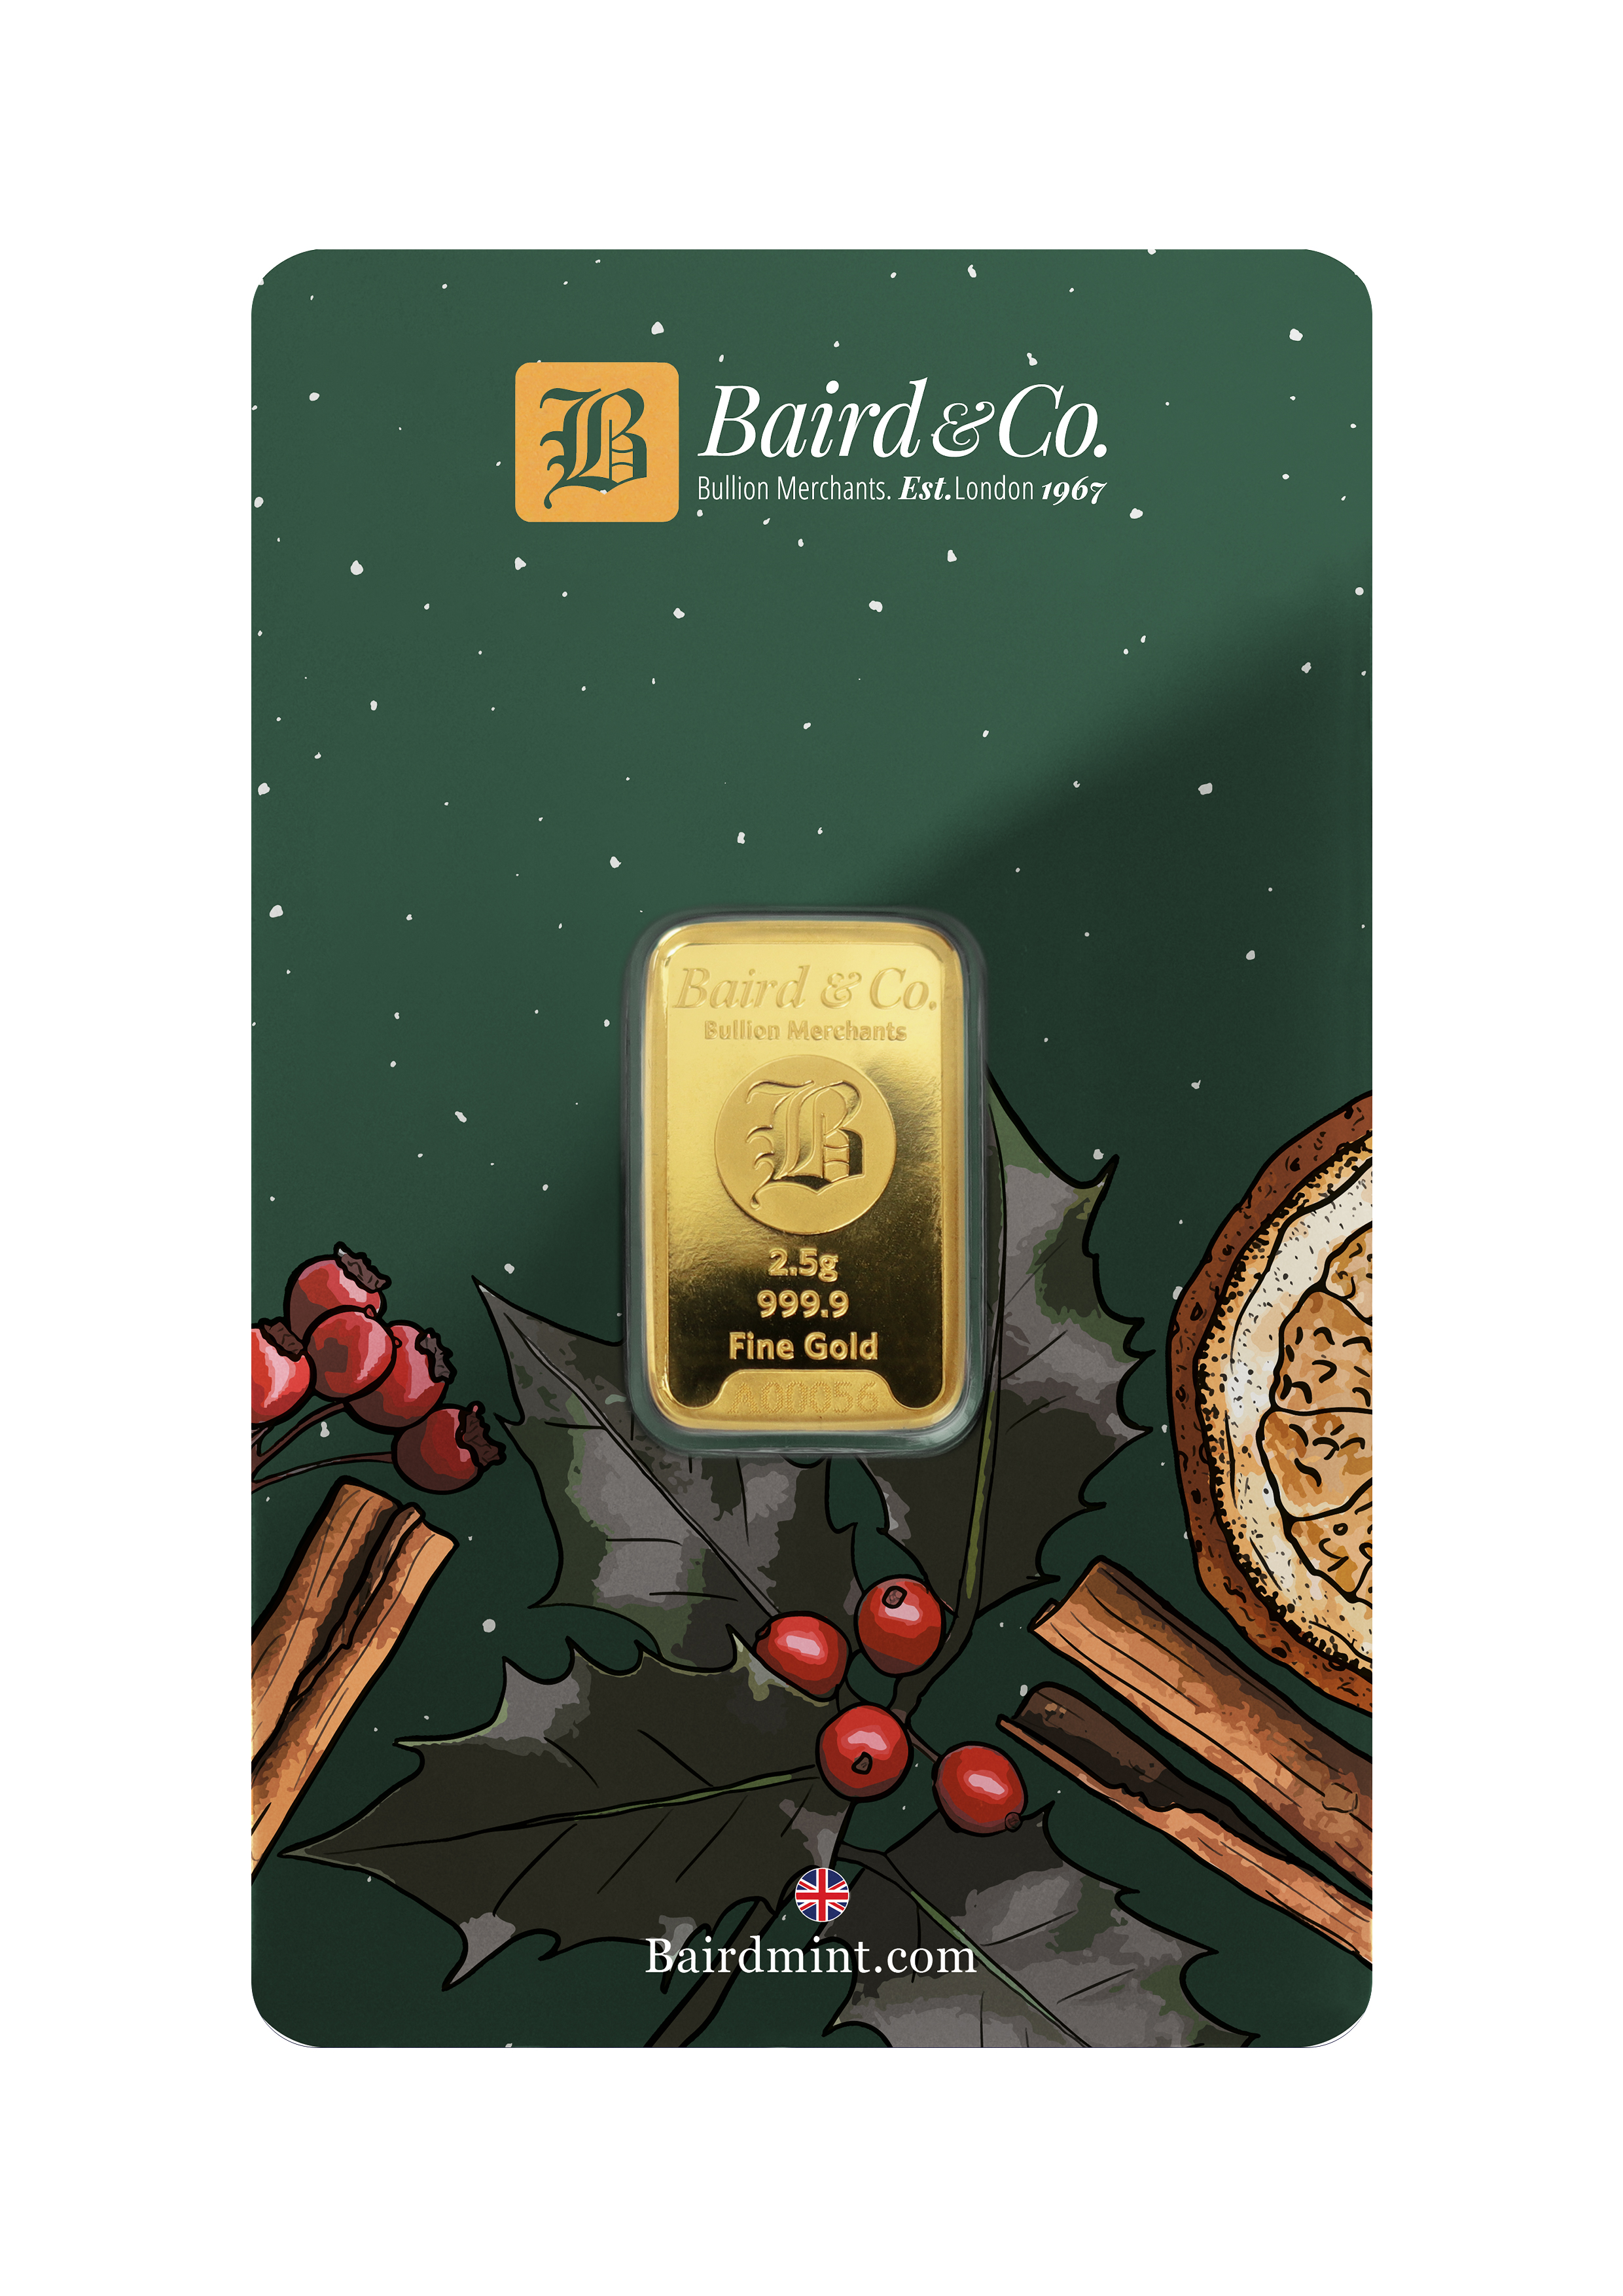 Baird & Co 2.5g Gold Minted Bar Christmas Packaging